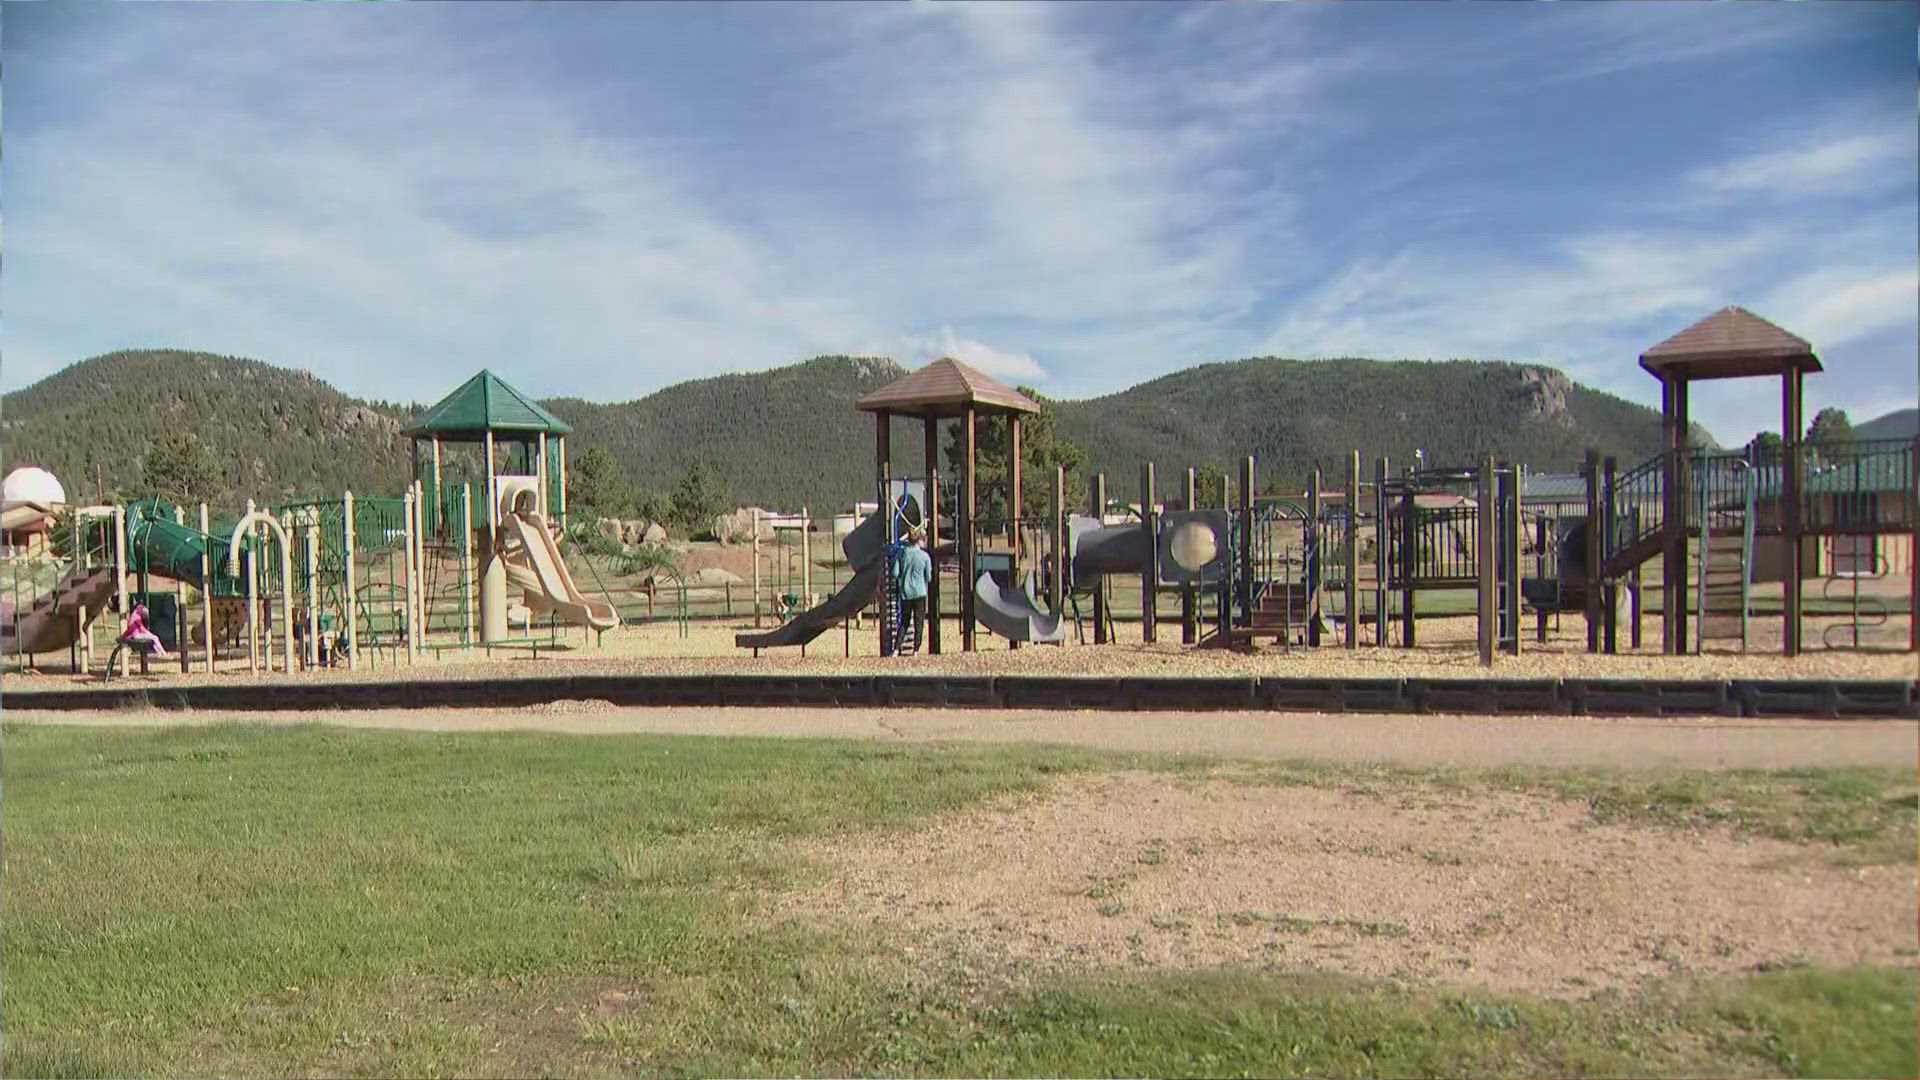 A young boy was playing at a park playground when the elk charged at him. He was taken to a hospital and was treated and released the same day.